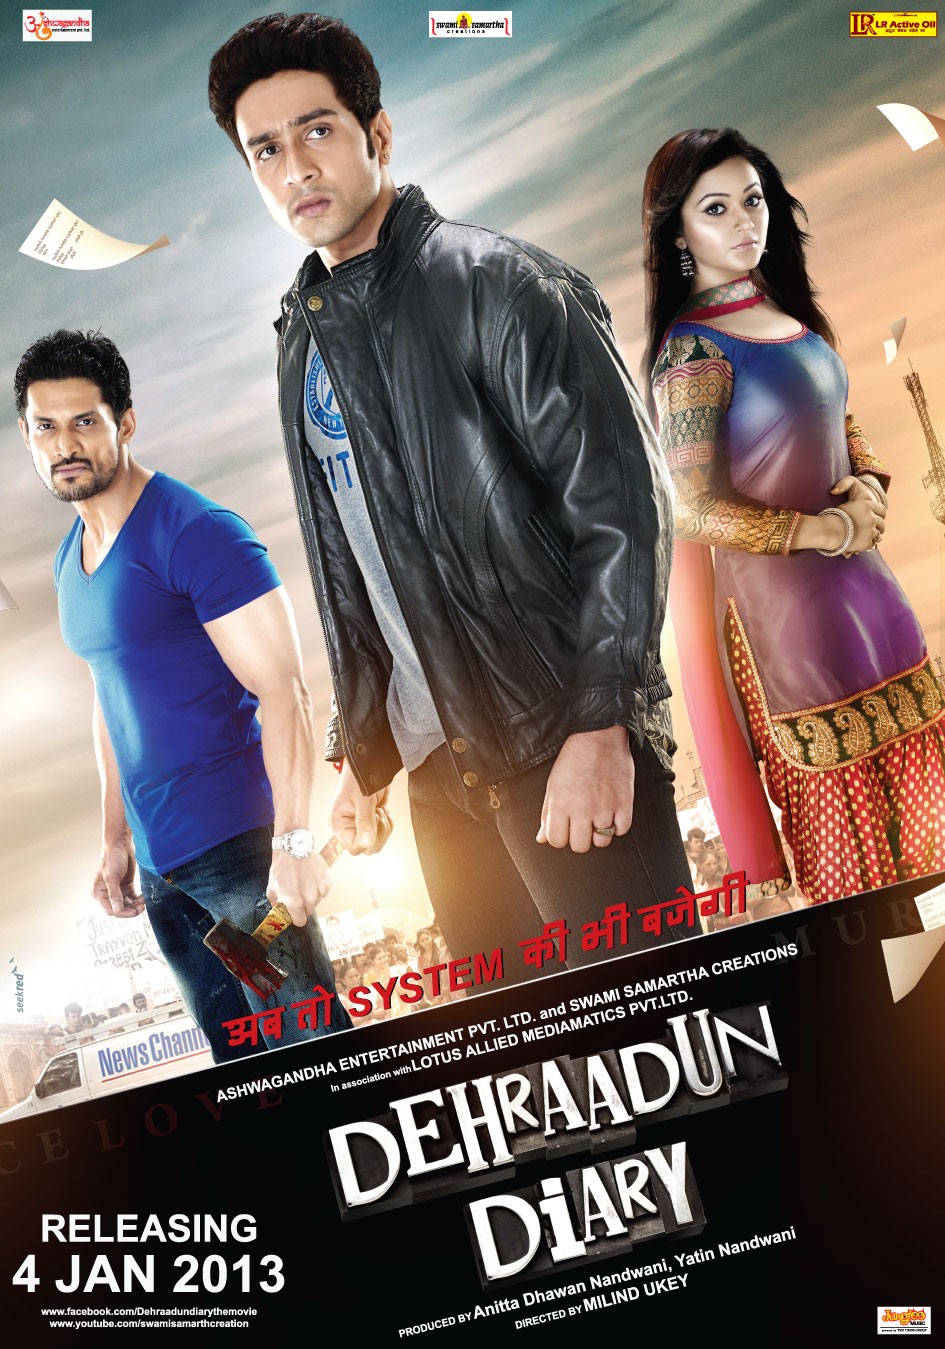 Extra Large Movie Poster Image for Dehraadun Diary (#2 of 4)